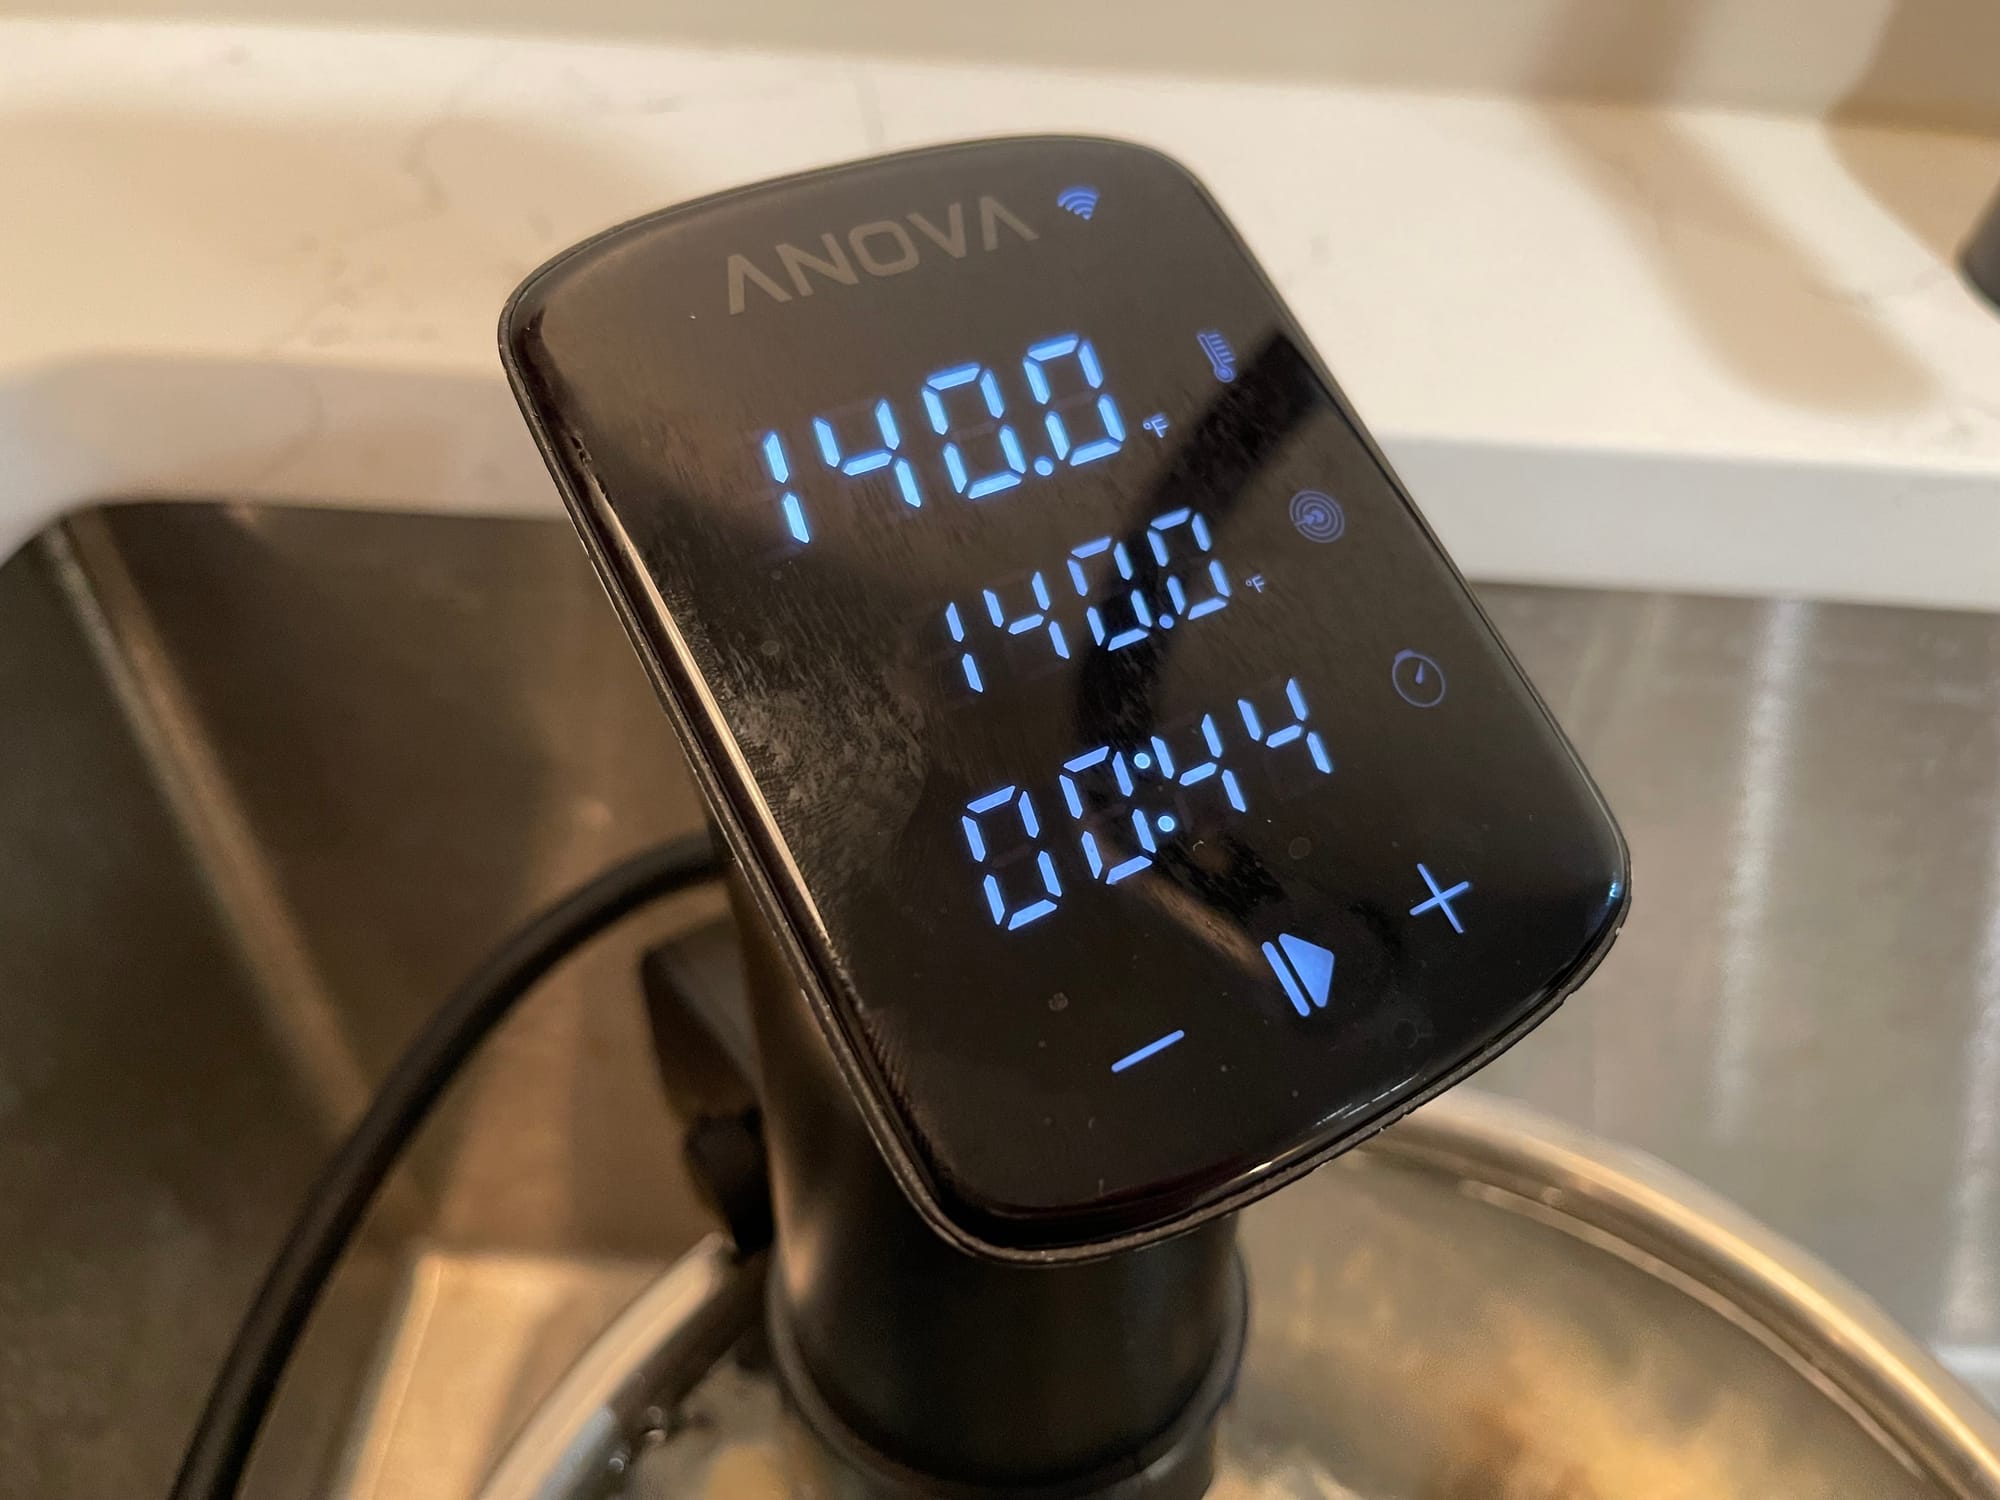 How Do I Clean My Sous Vide Cooker?